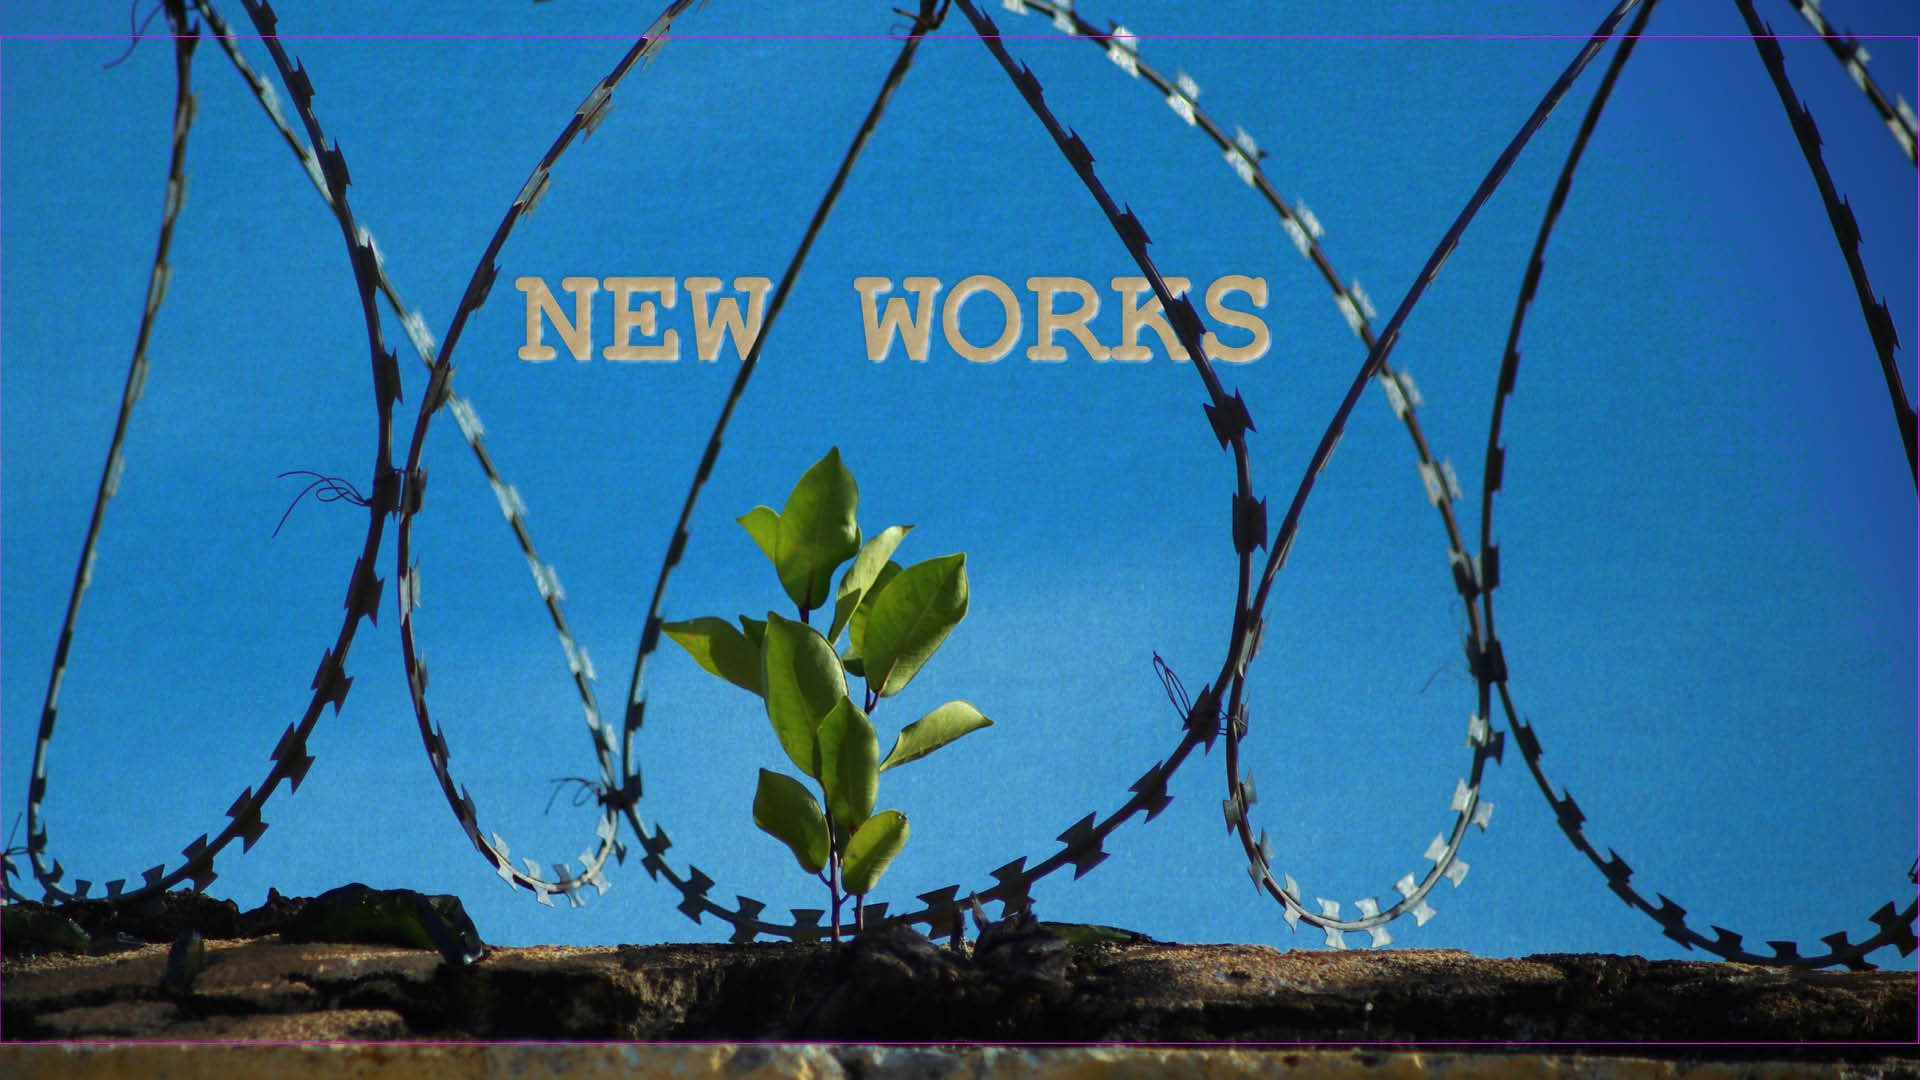 a sapling growing through barbwire, and the title "New Works"